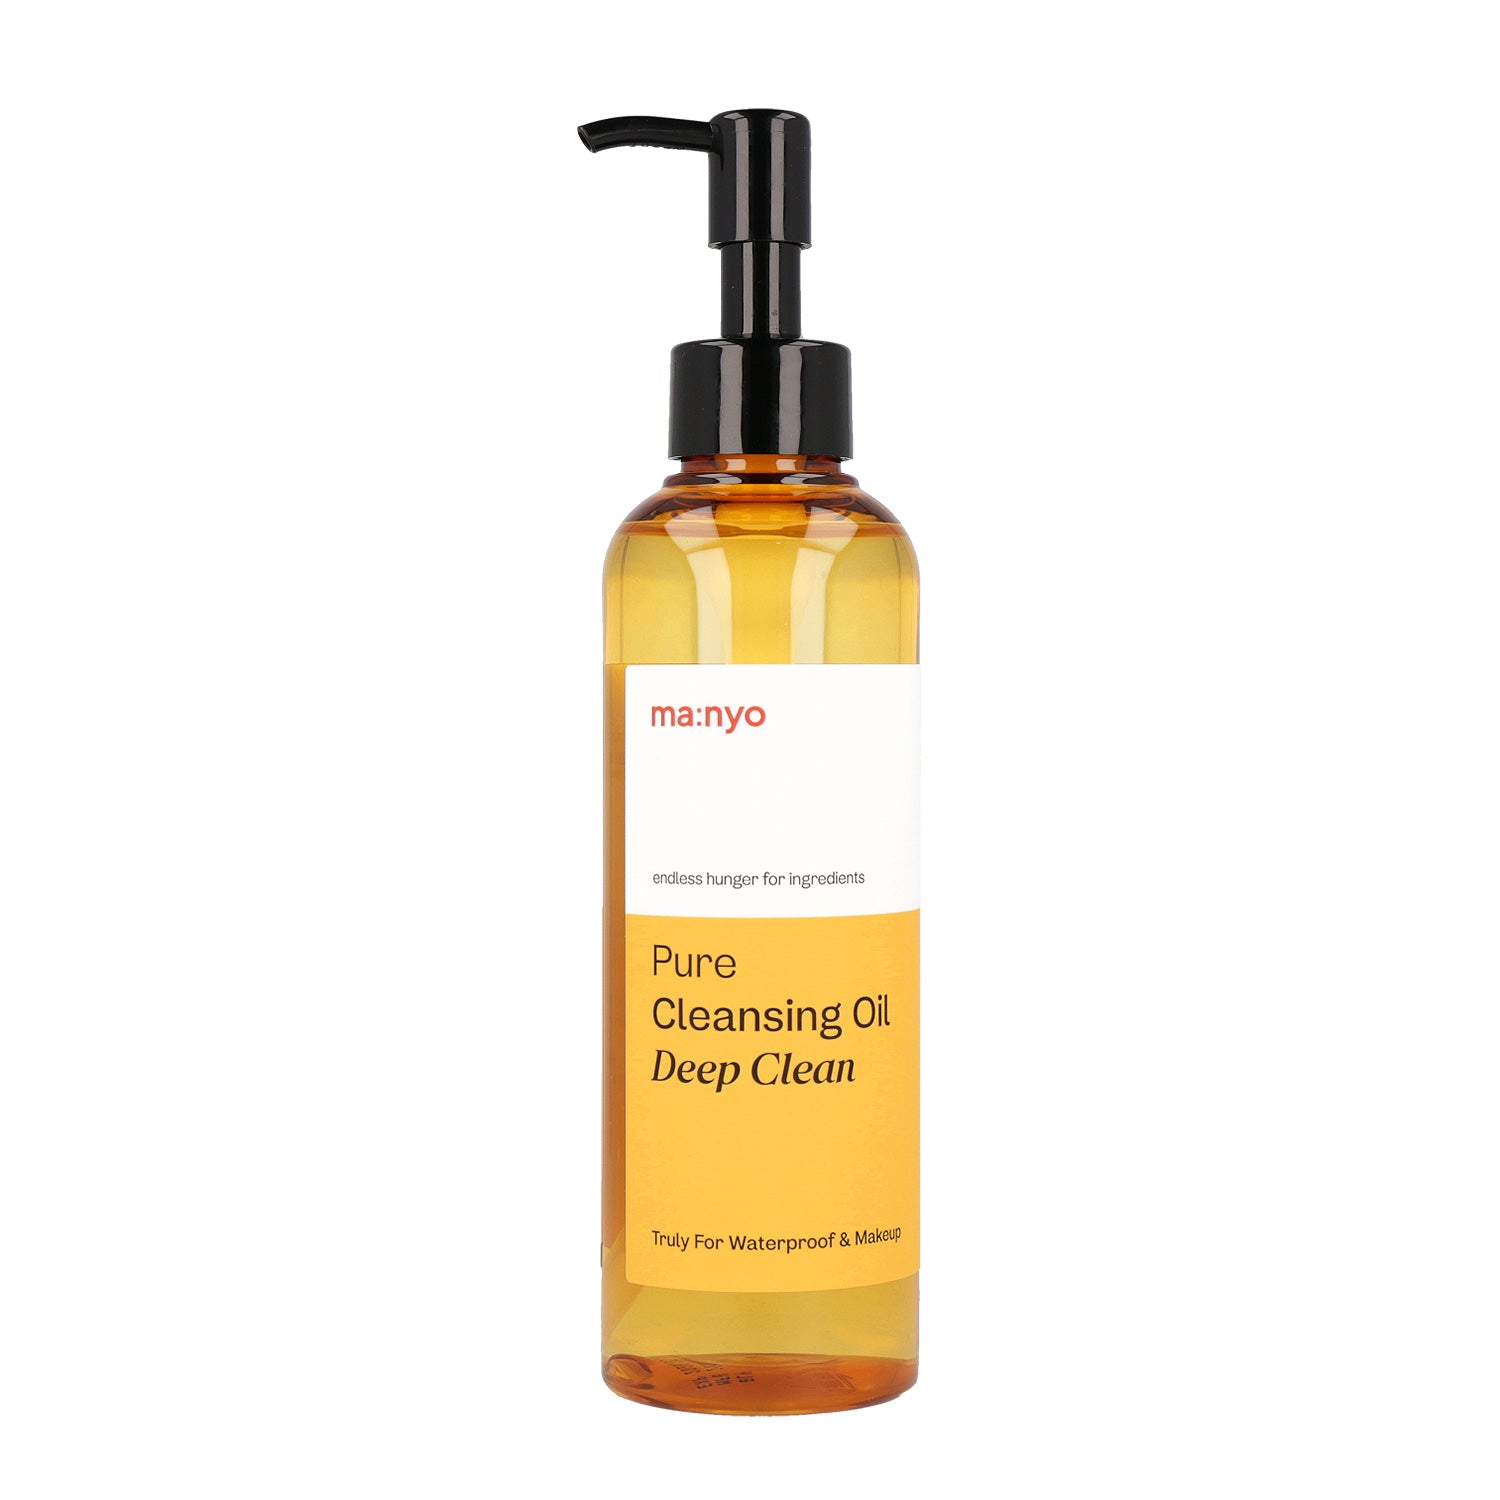 MANYO FACTORY Pure Cleansing Oil Deep Clean 200ml - DODOSKIN